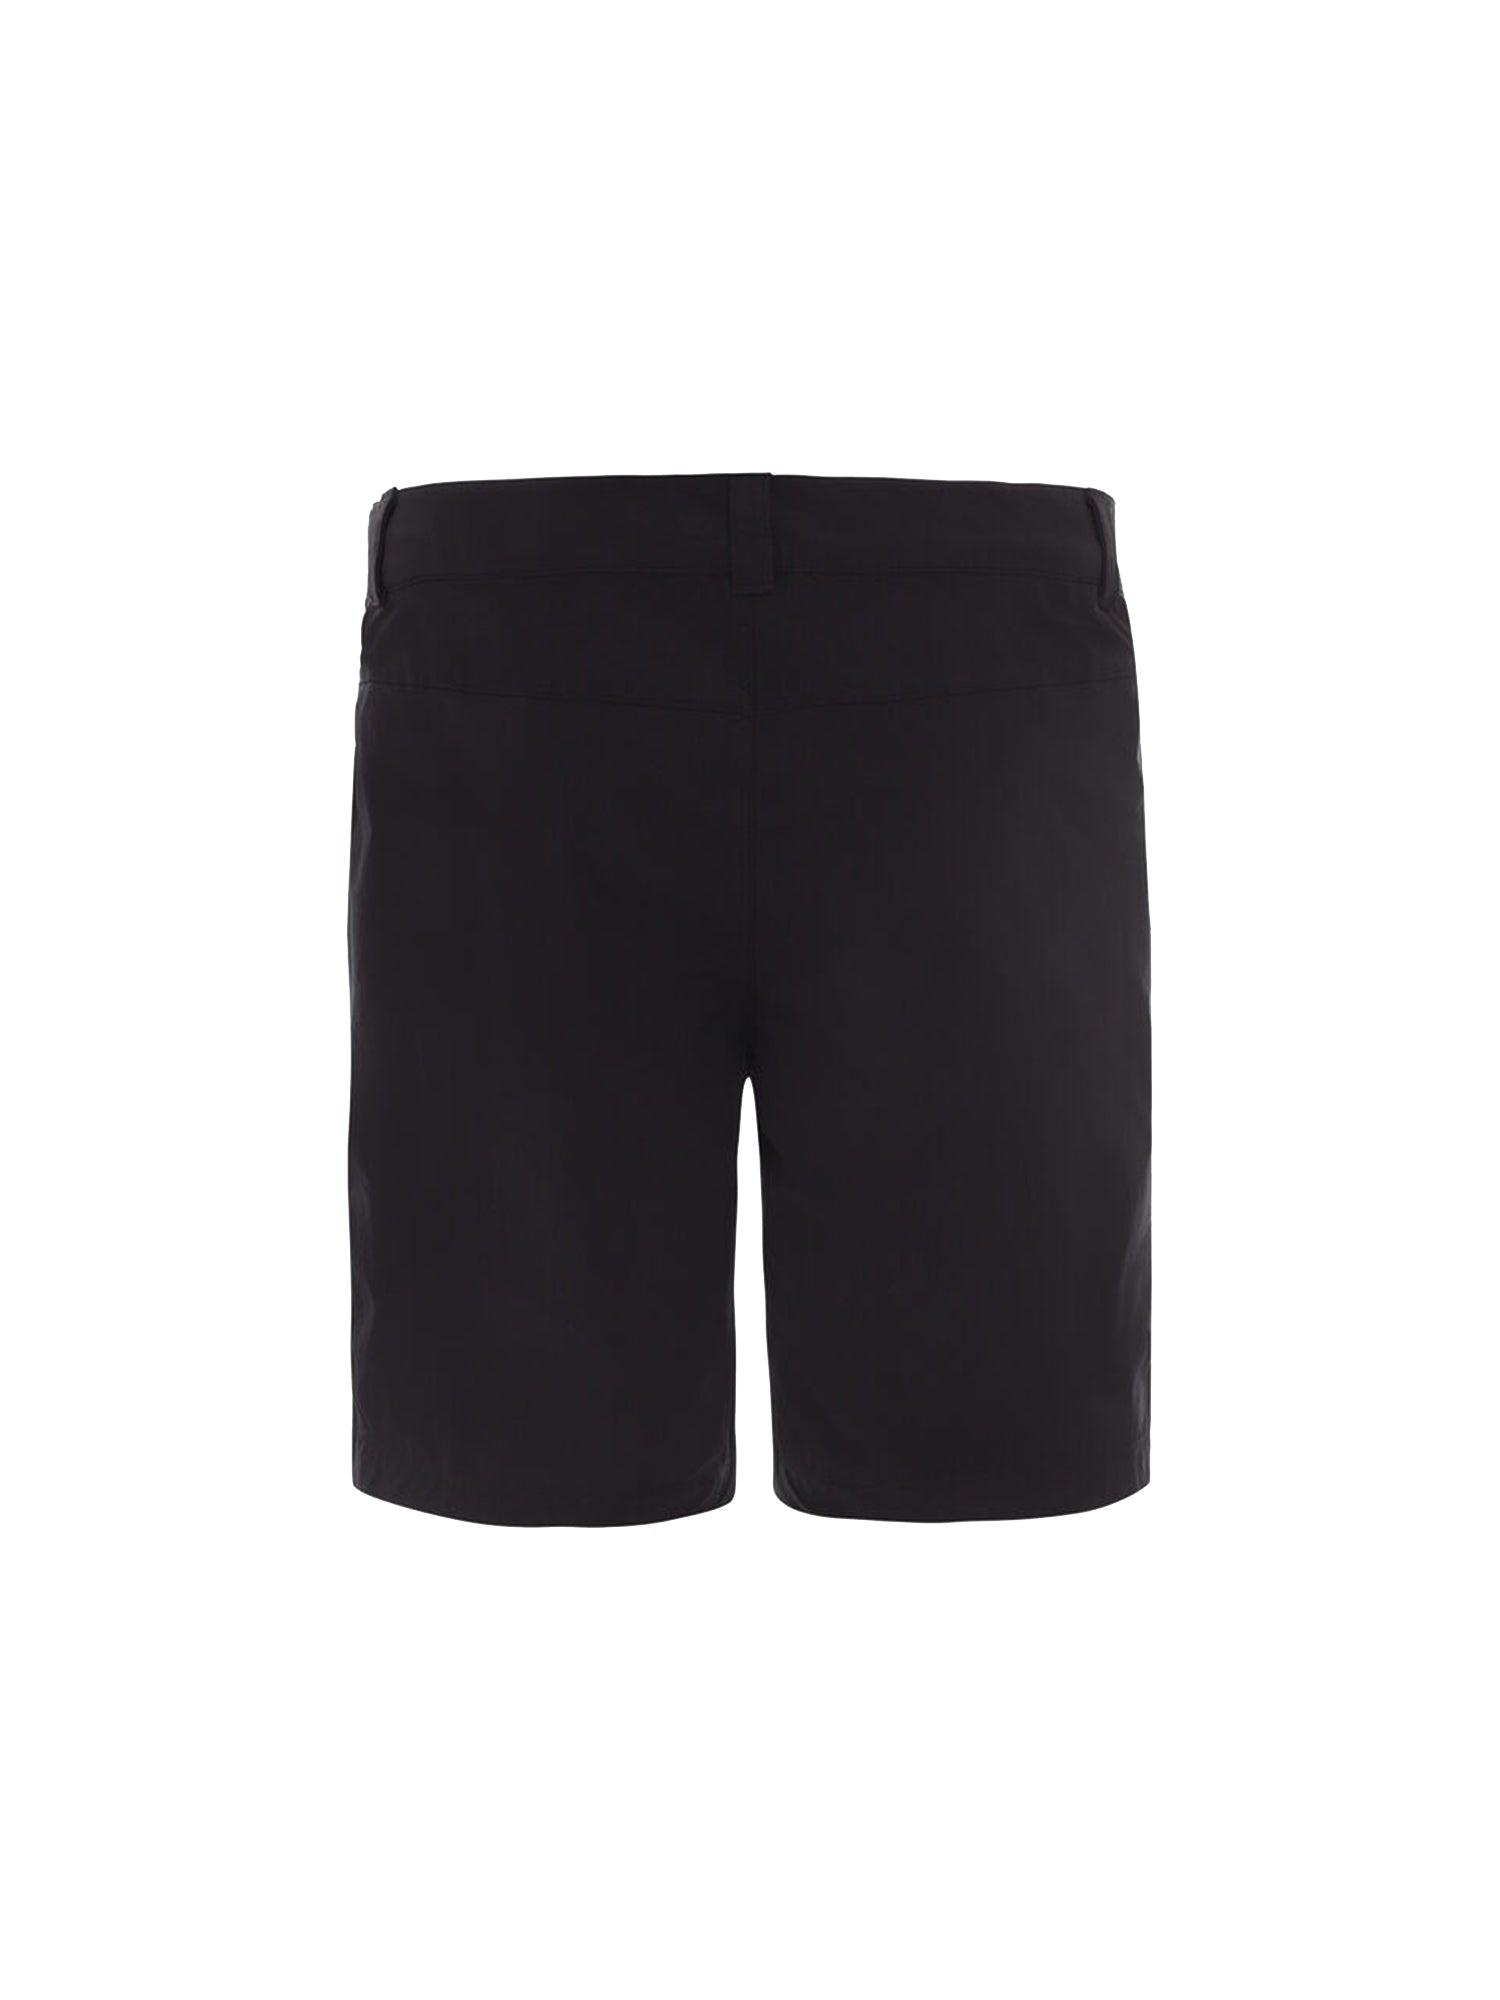 THE NORTH FACE EXTENT III SHORT NERO